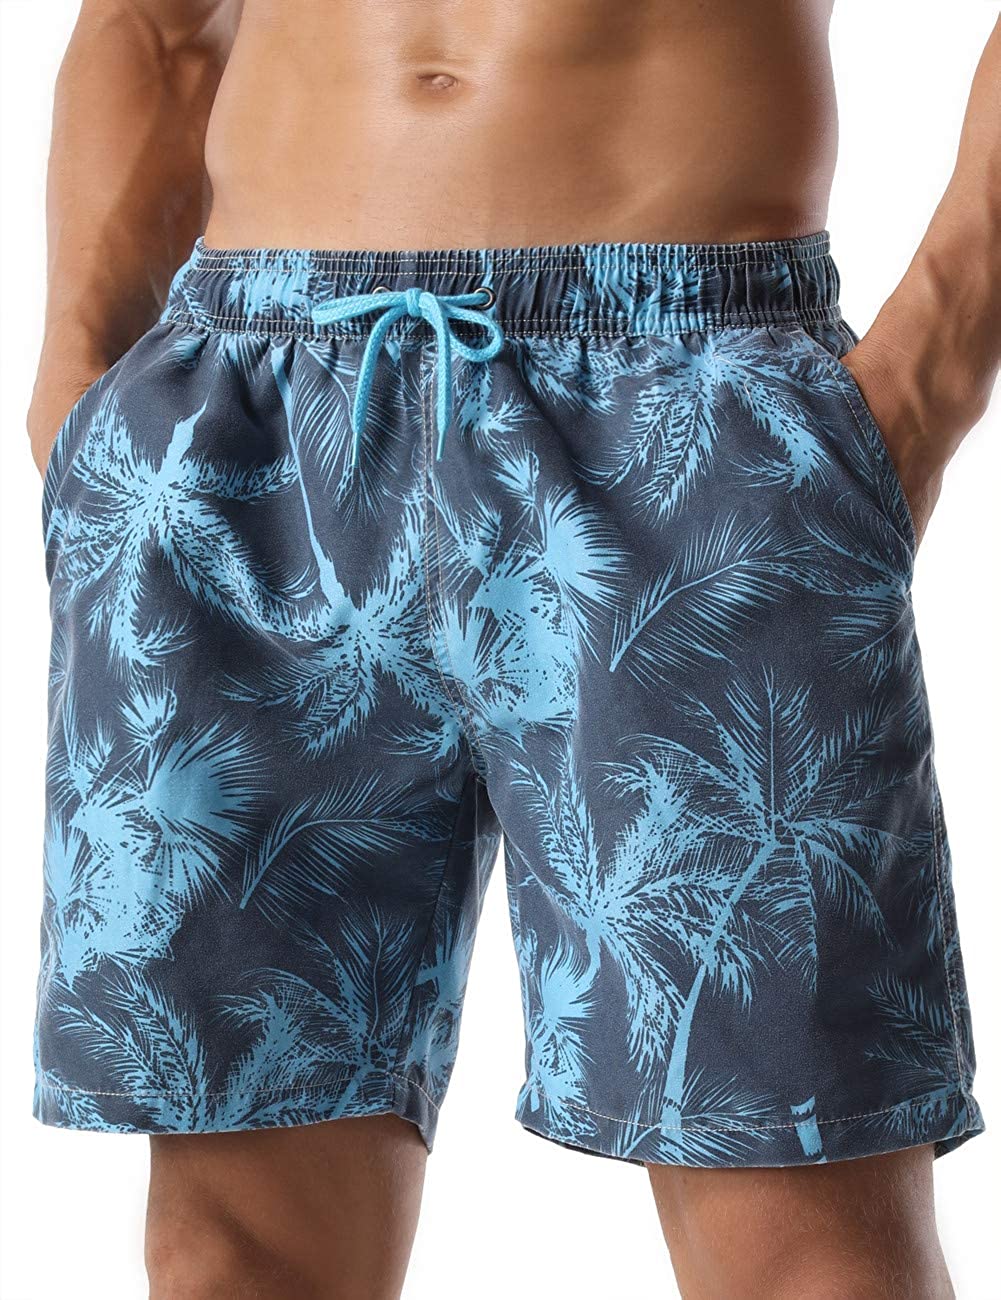 Nonwe Mens Surf Quick Dry Swim Trunks with Drawsting 